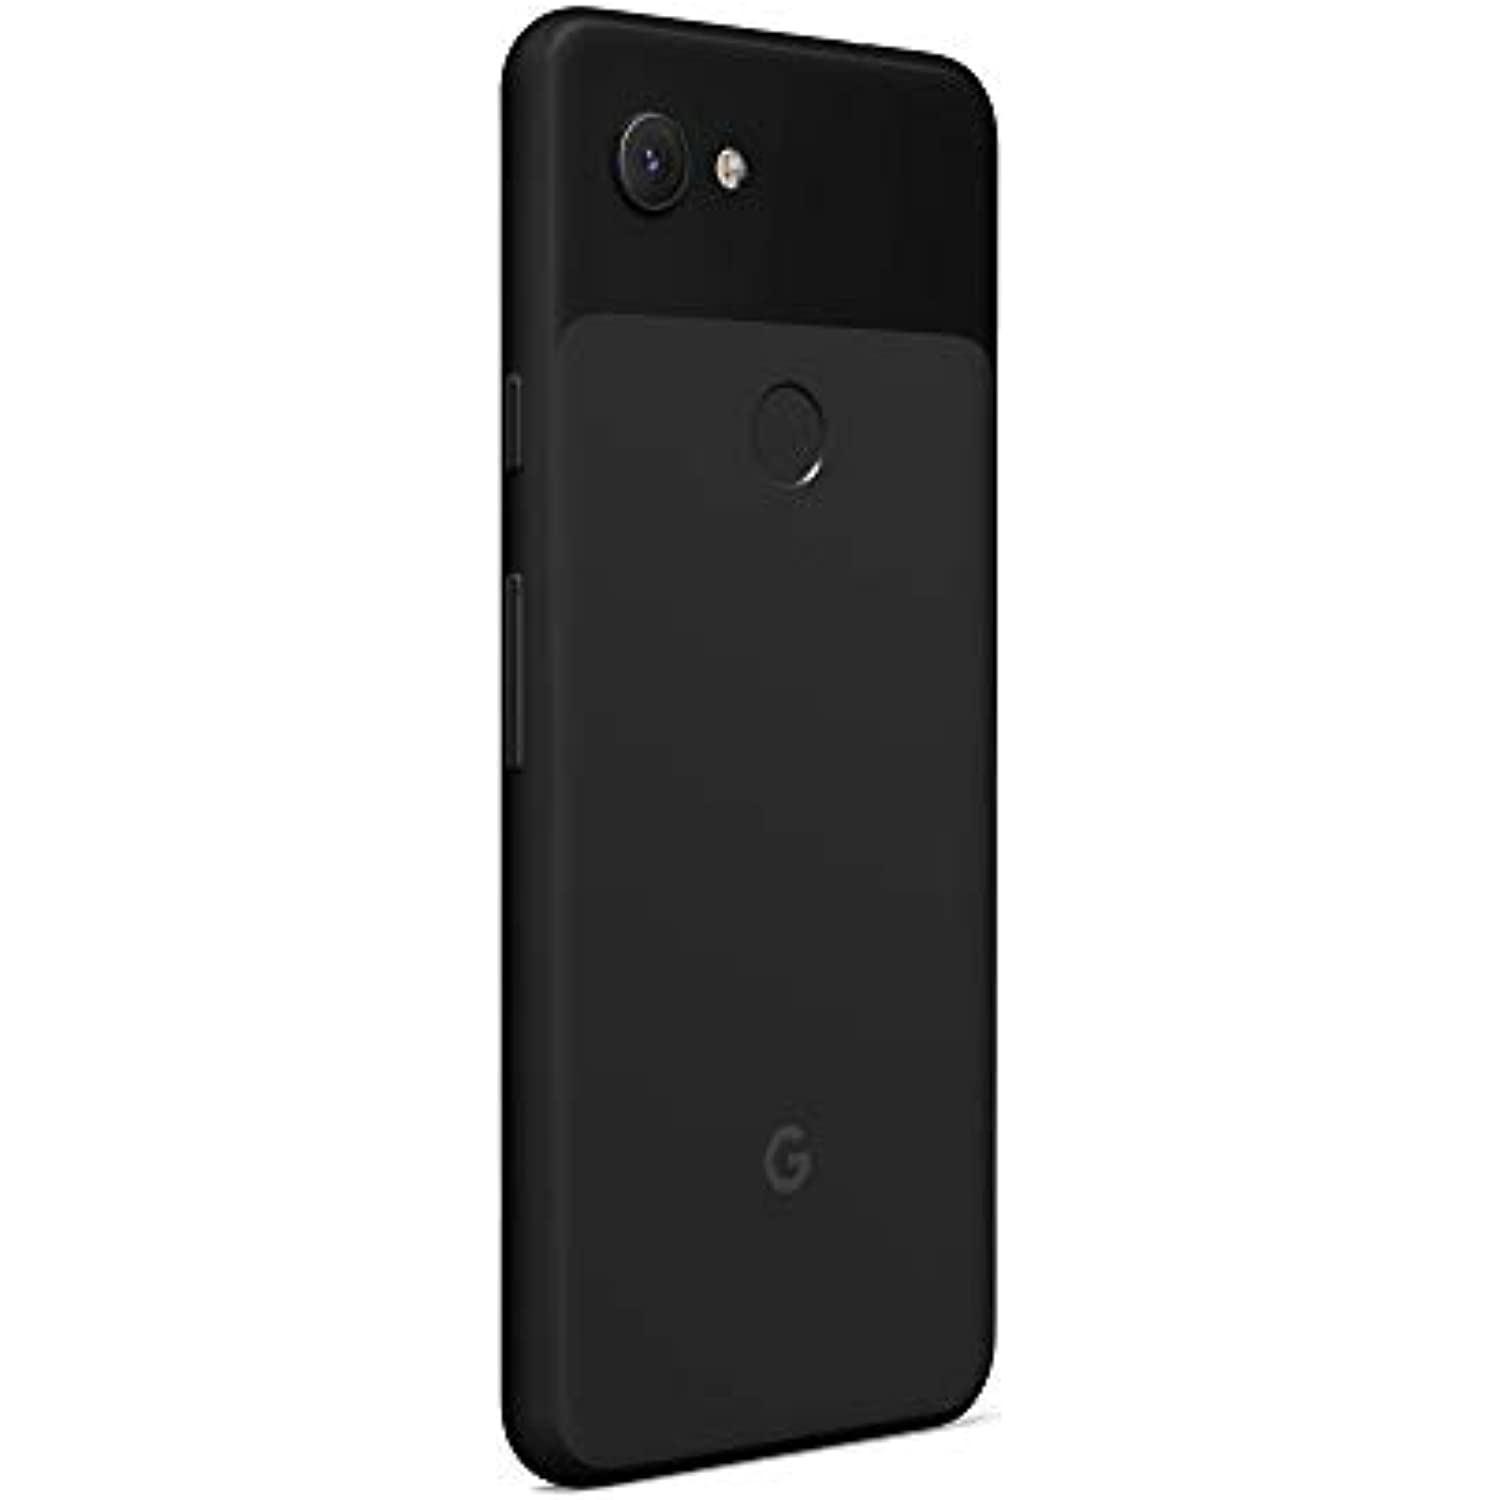 Google - Pixel 3a with 64GB Memory Cell Phone (Unlocked) - Just Black - image 3 of 5